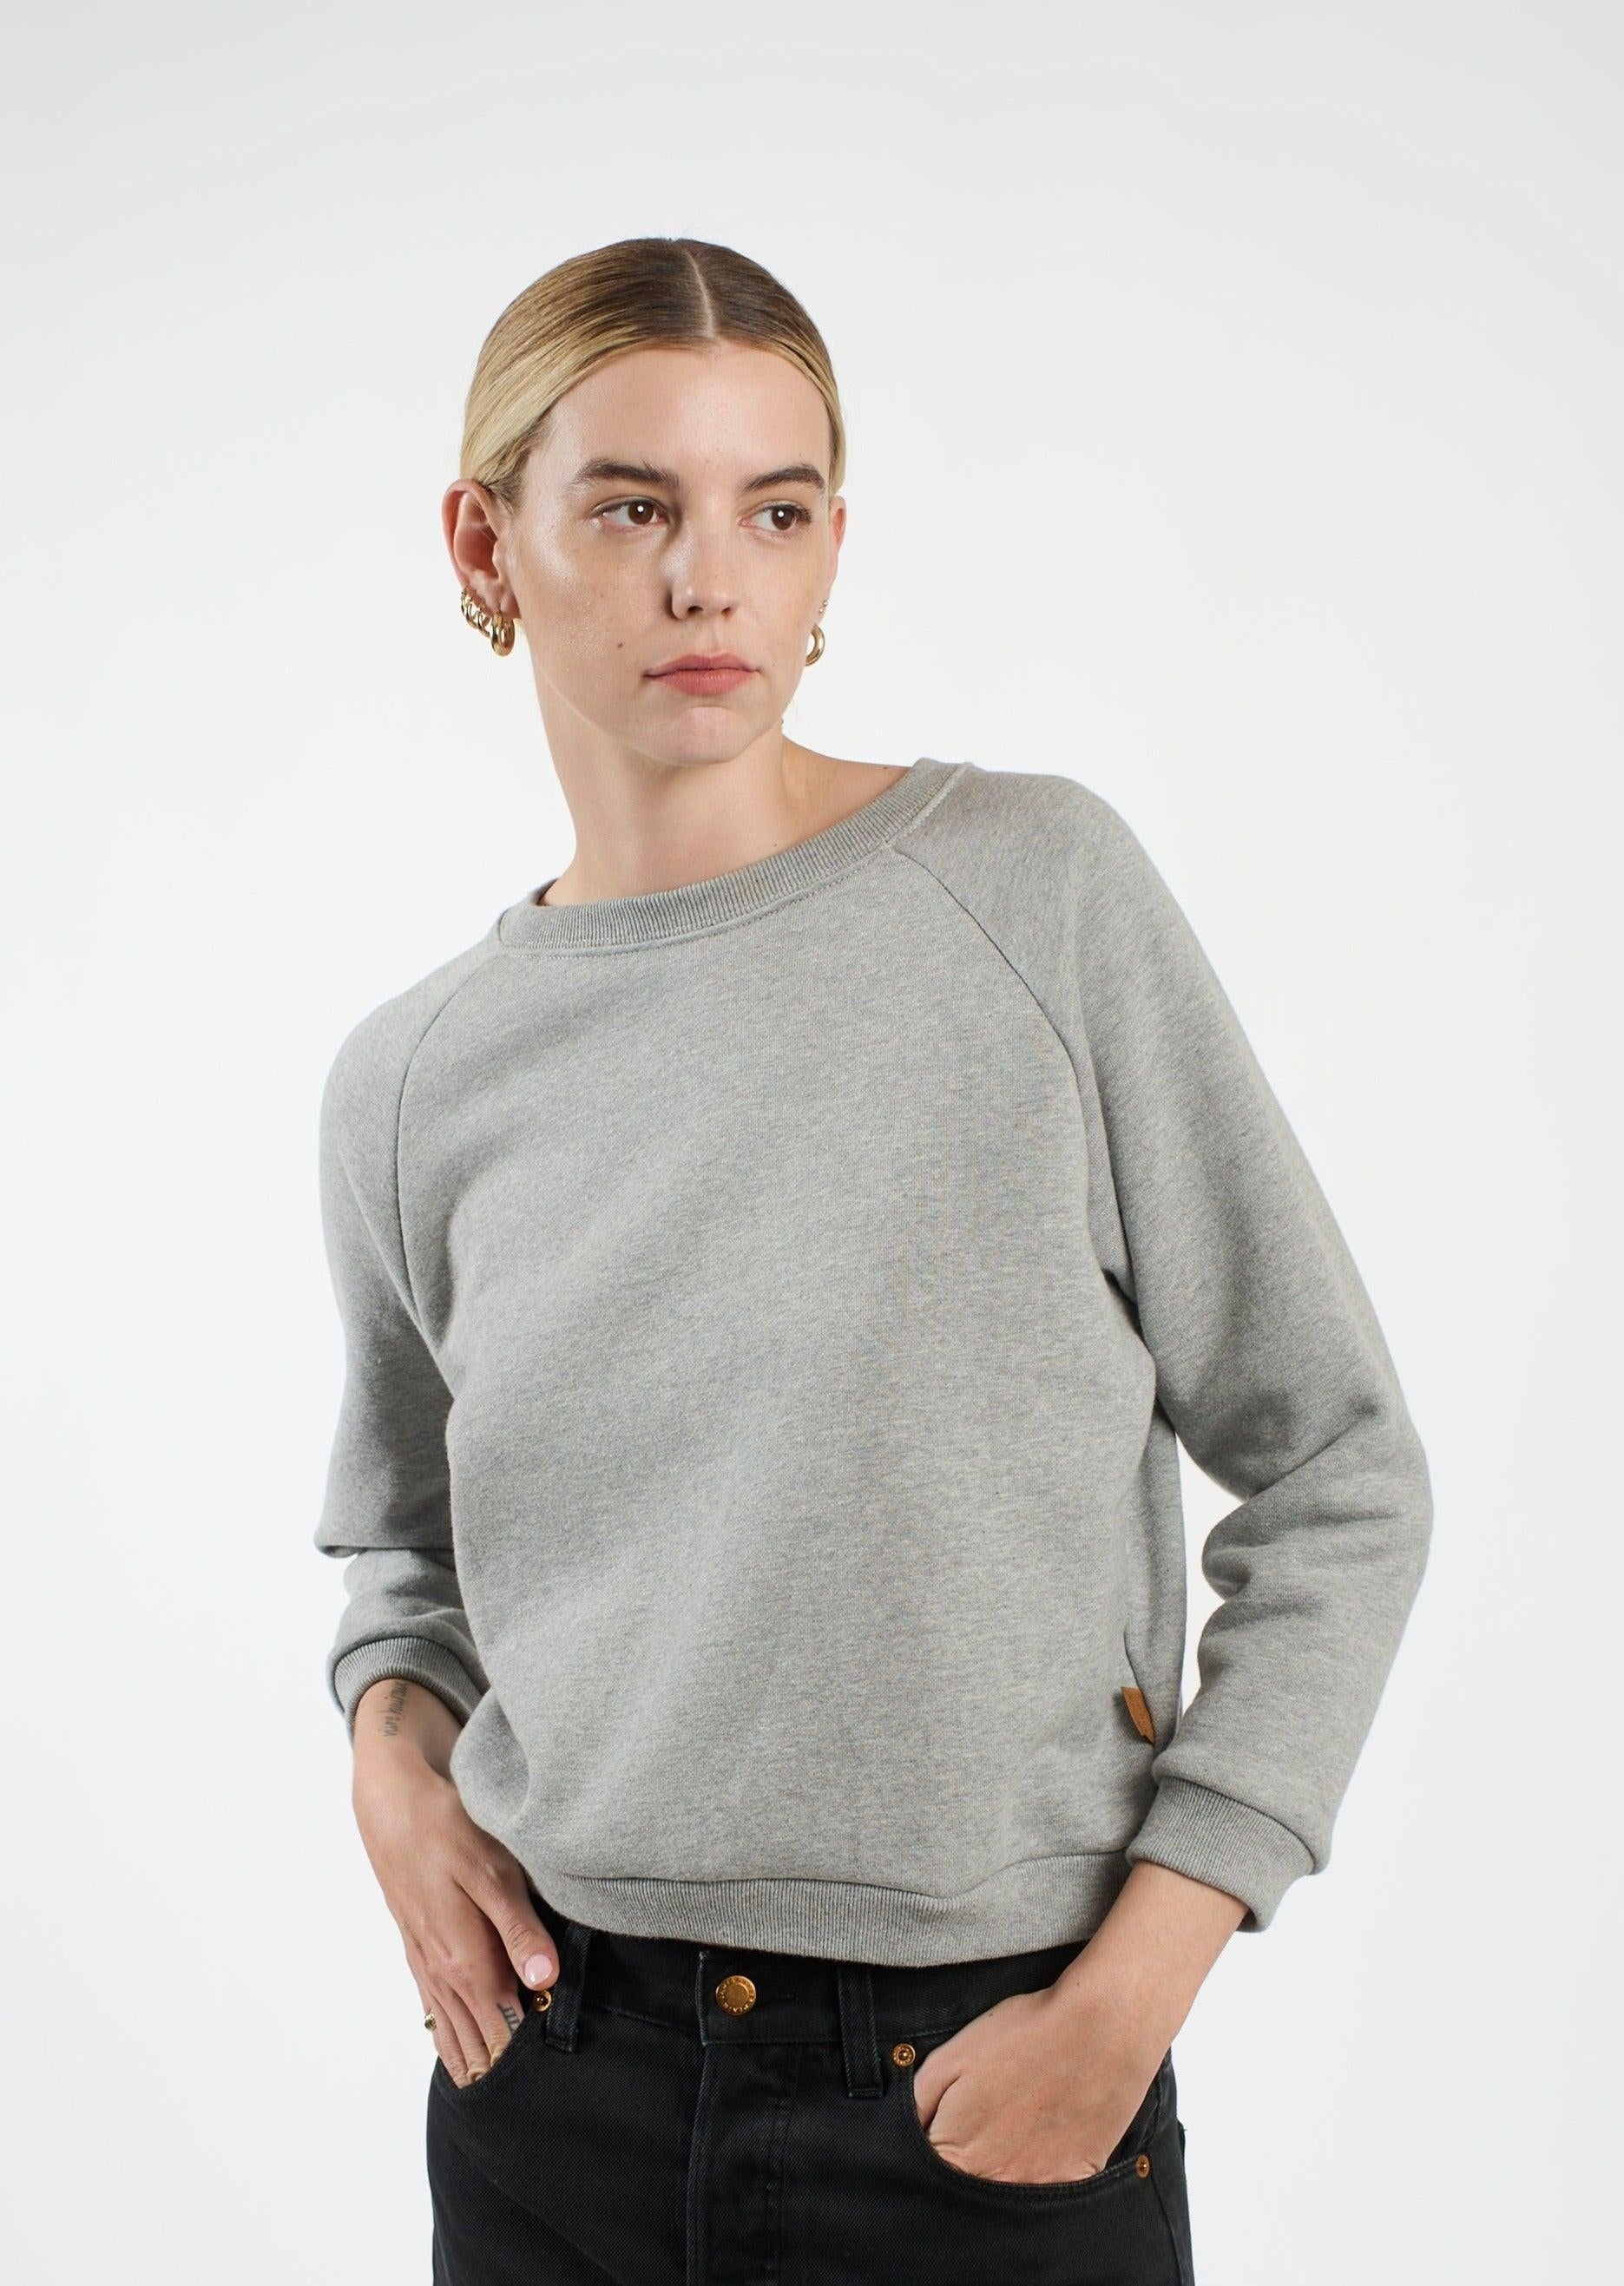 The Daily Sweatshirt in Heather Grey 3/4 Front w/ Hands in Pocket